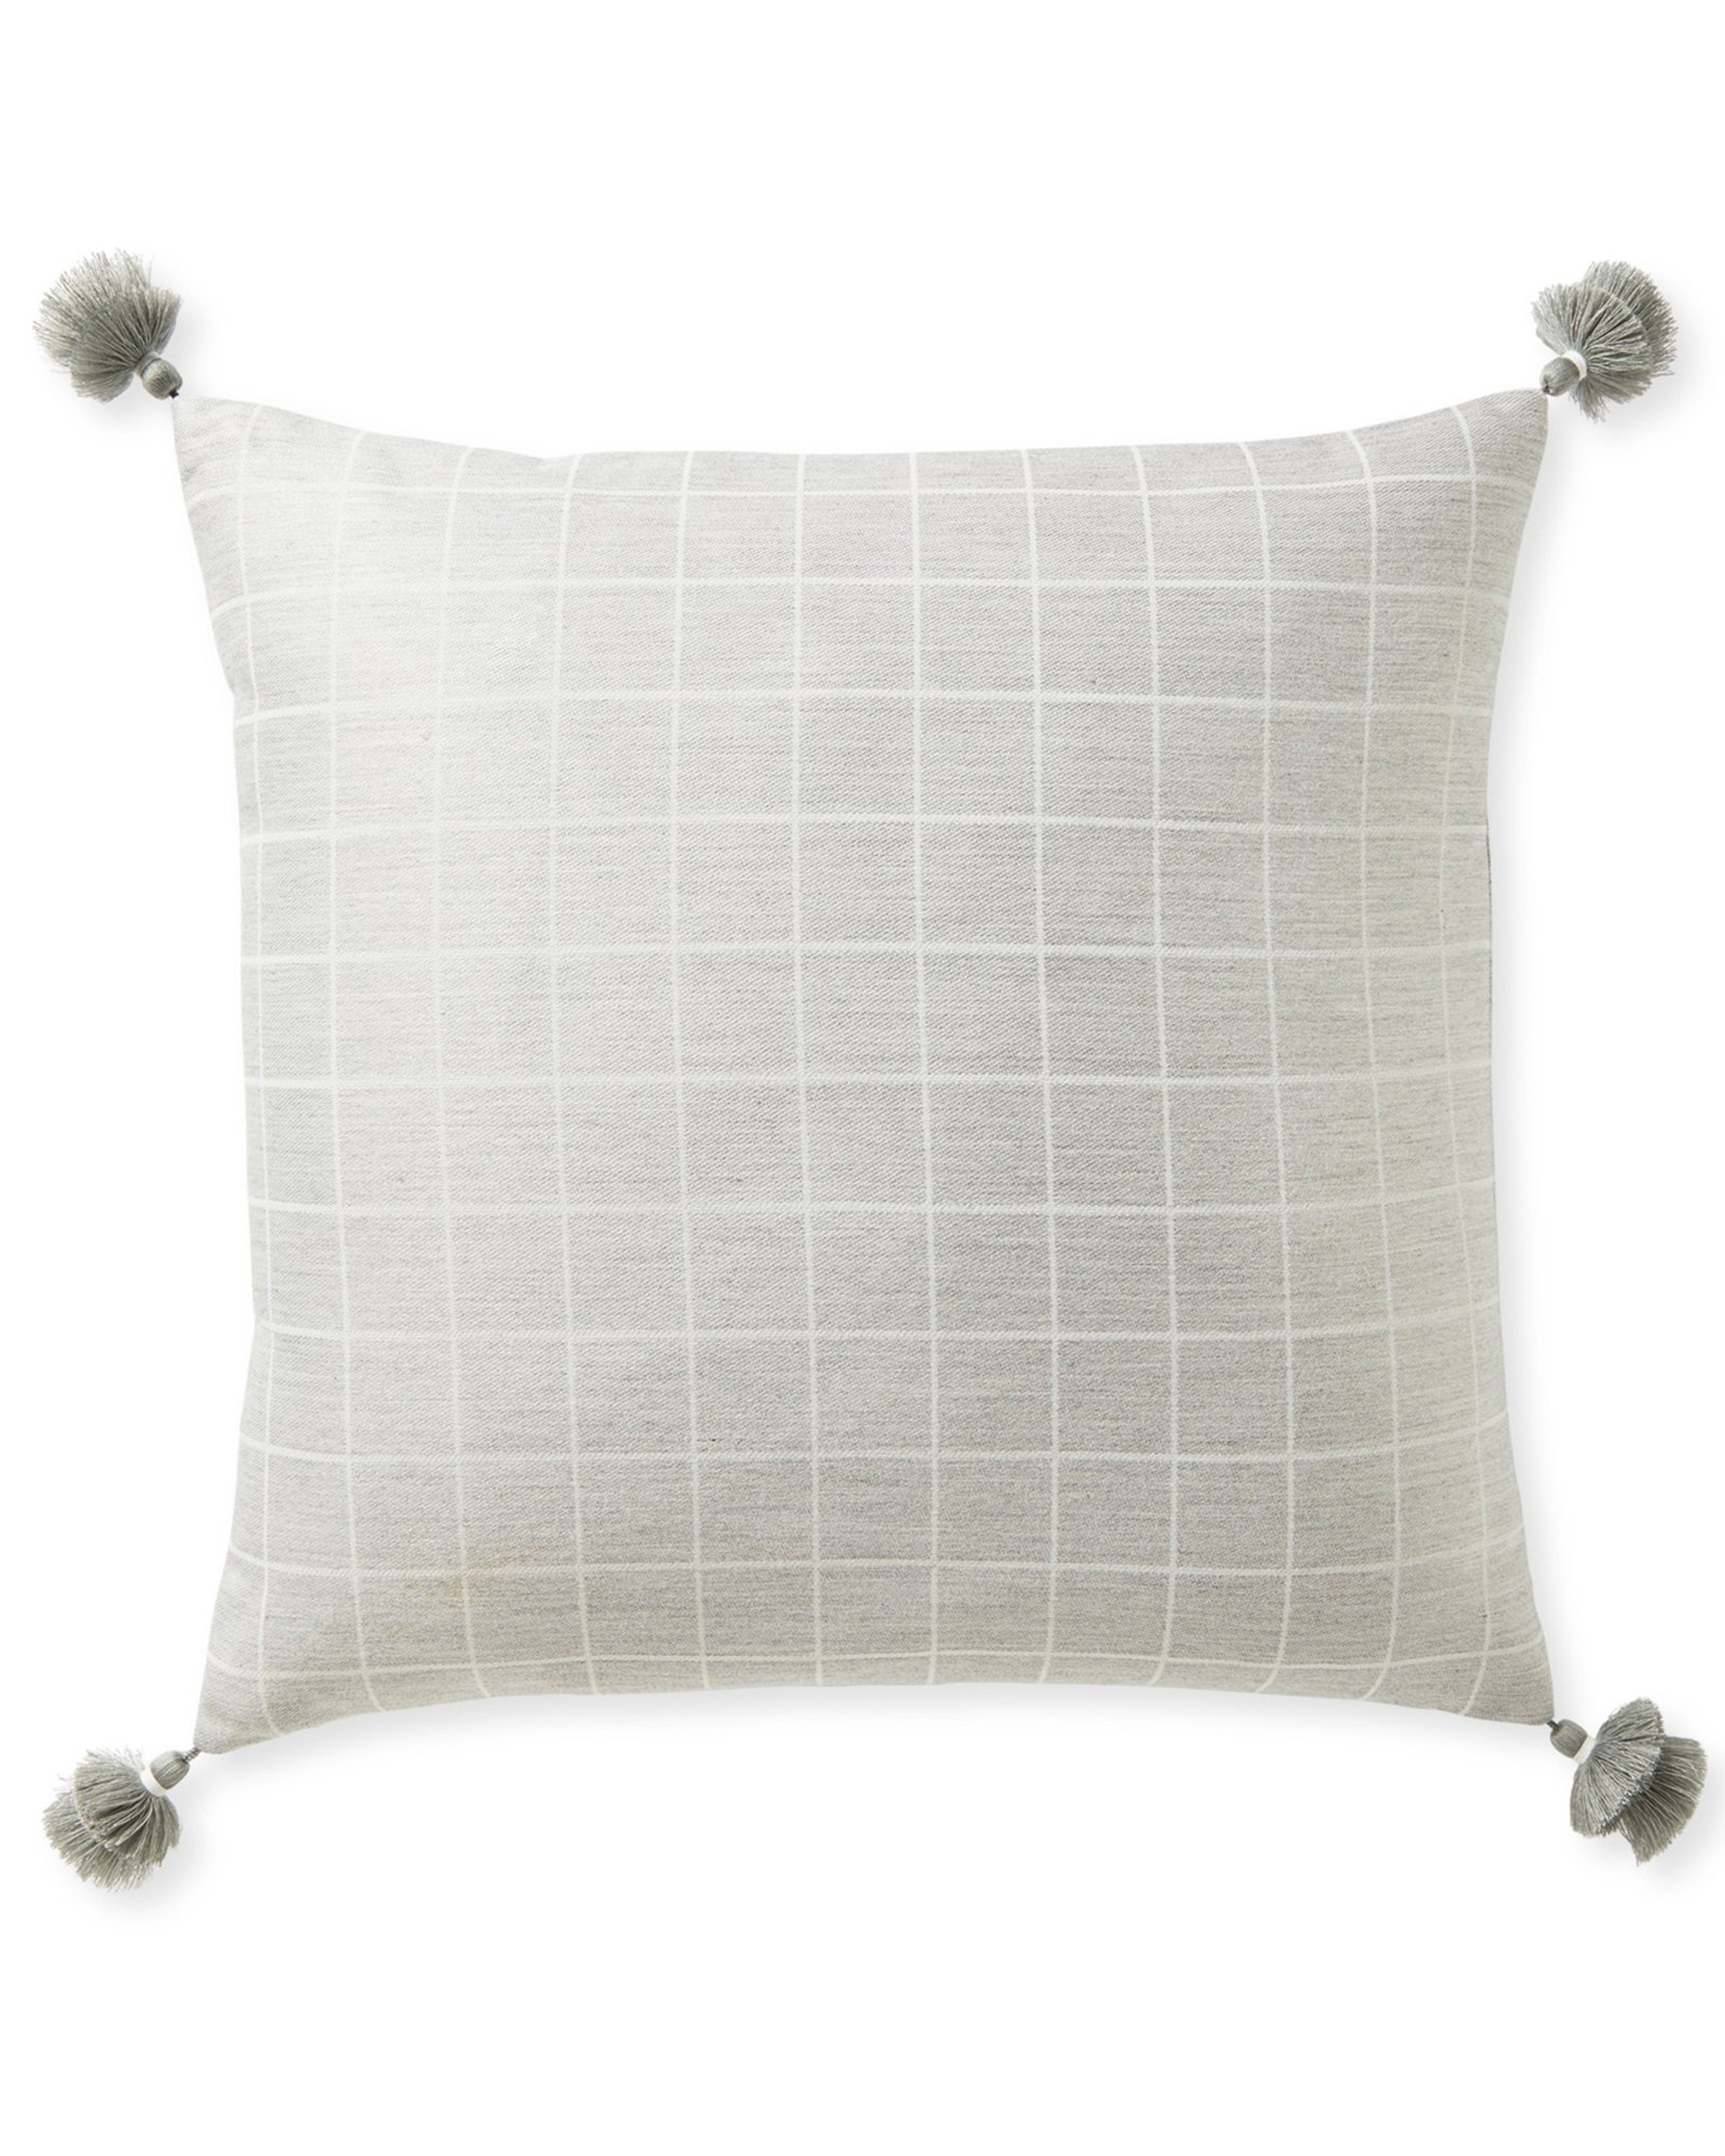 Mayne Pillow Cover, 24" Sq. Fog - Serena and Lily